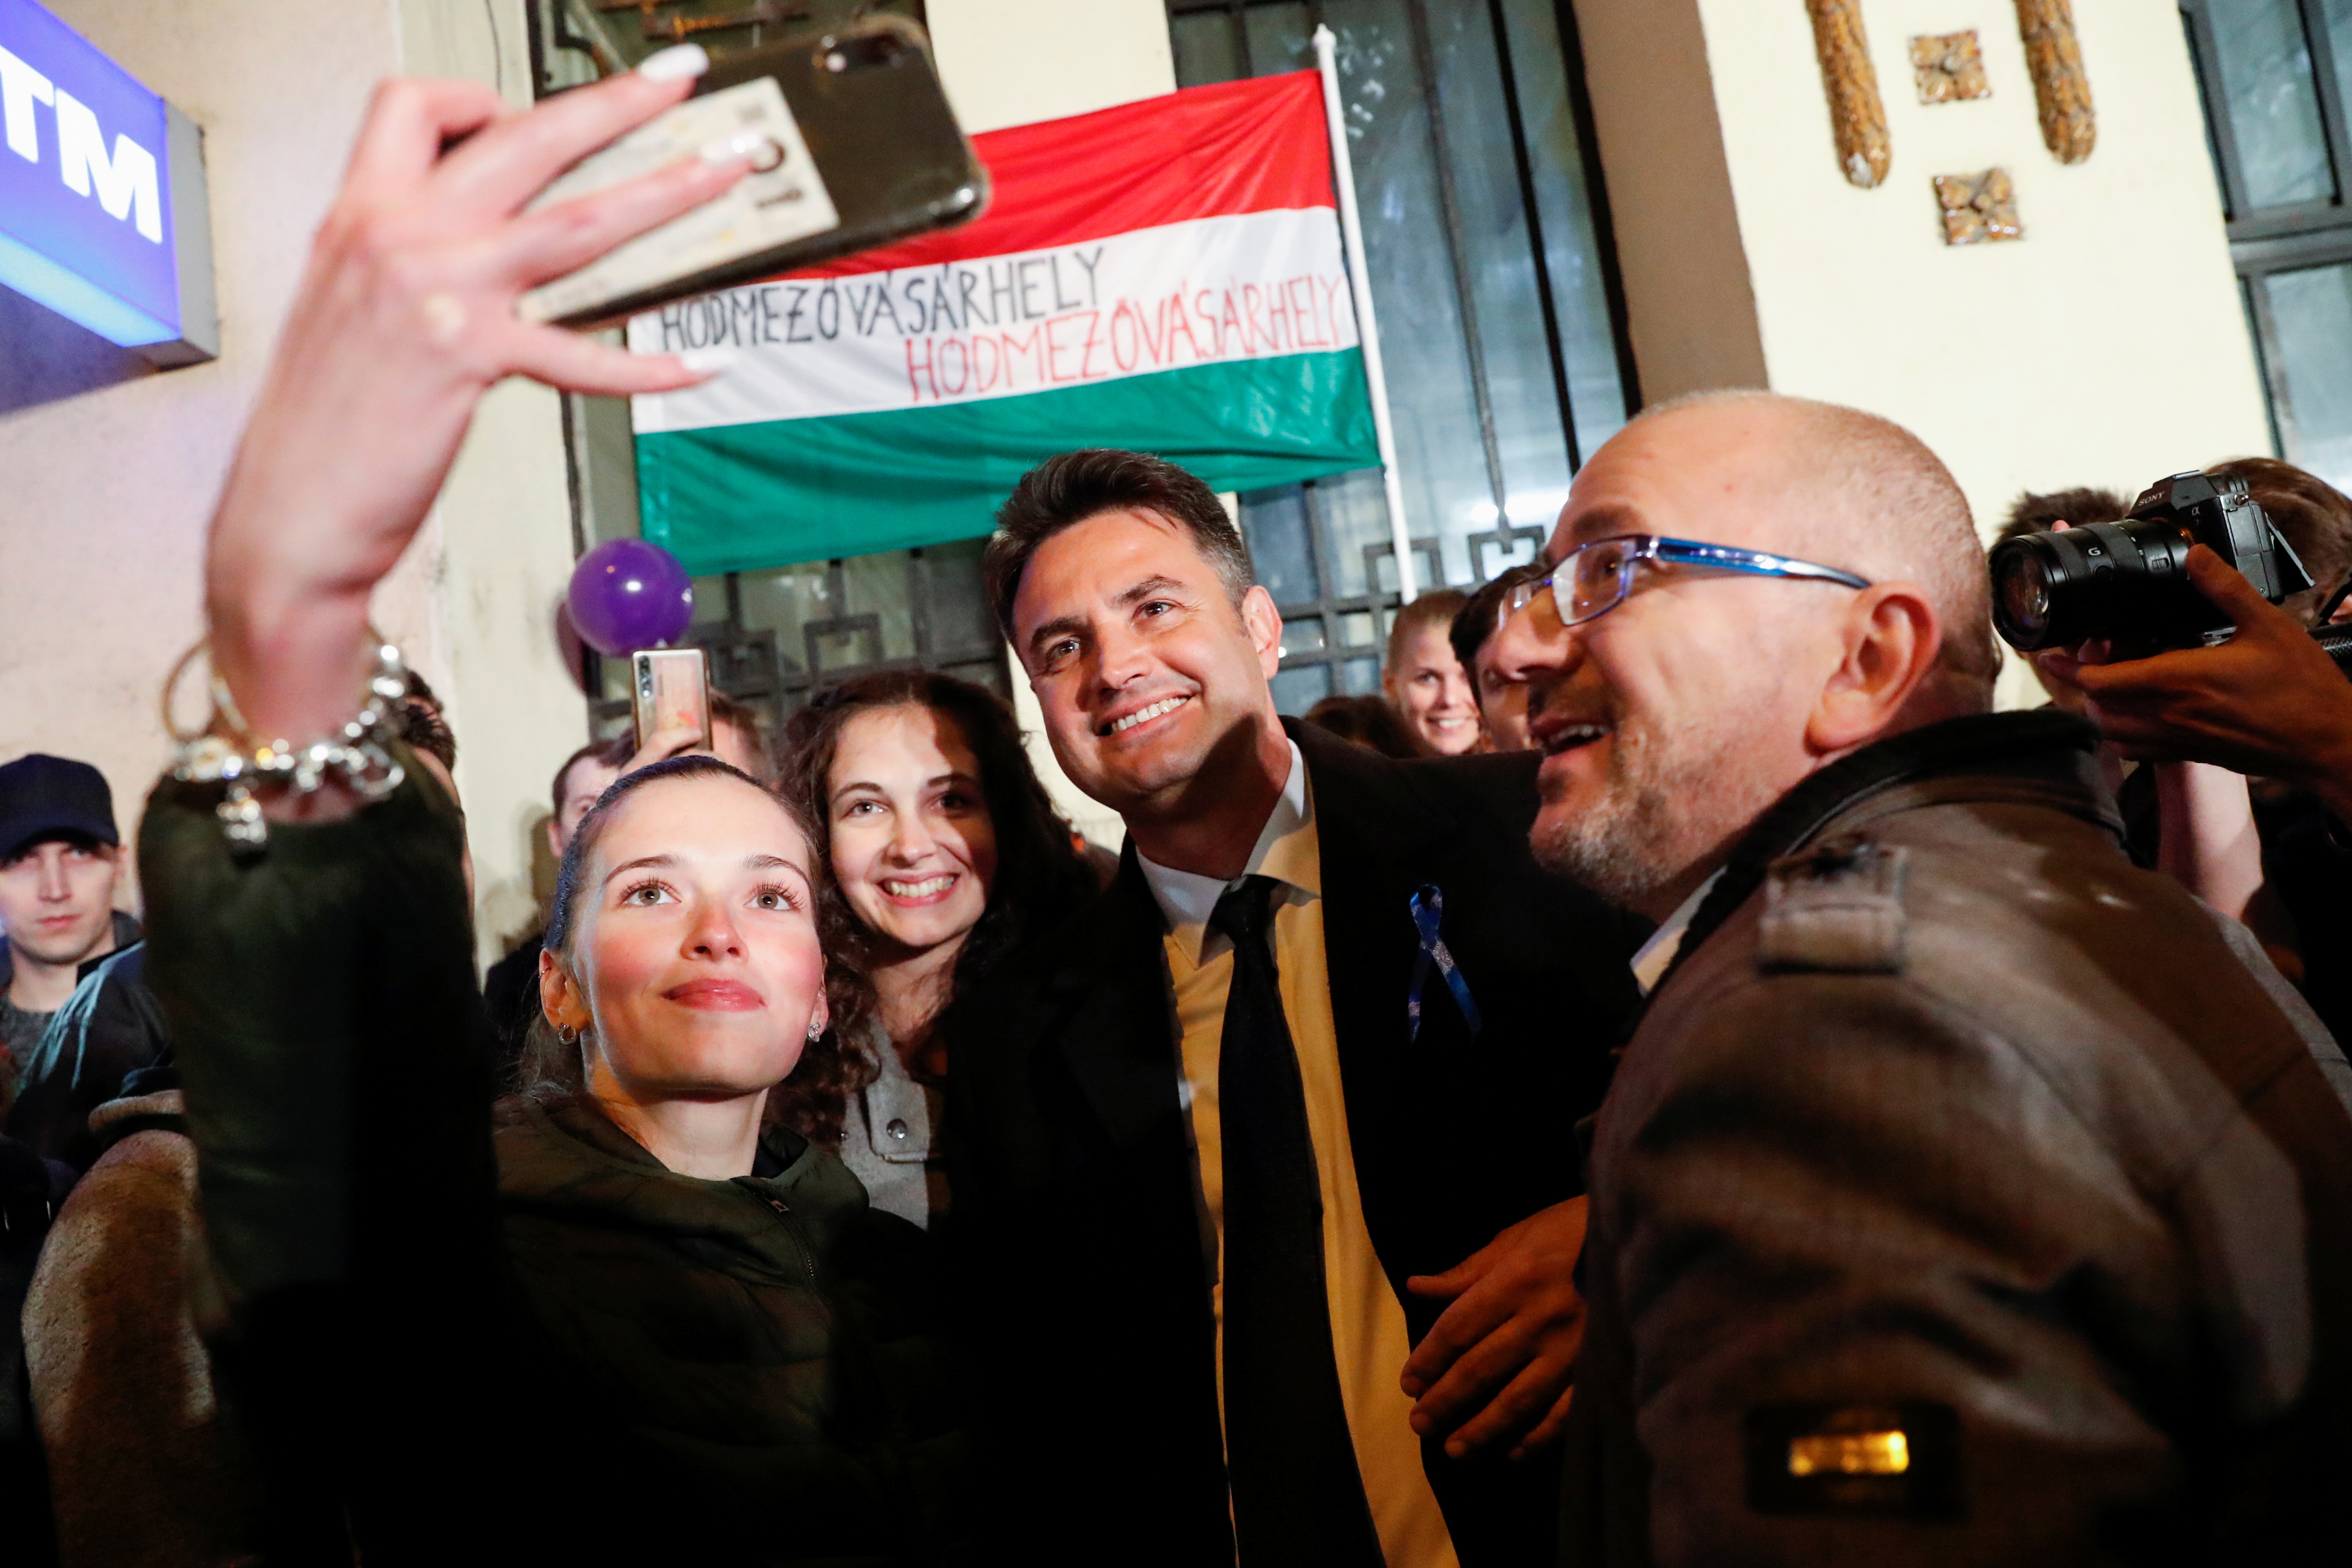 Opposition candidate for prime minister Peter Marki-Zay poses for a selfie with supporters at the election headquarters after the opposition primary election in Budapest, Hungary, October 17, 2021. REUTERS/Bernadett Szabo